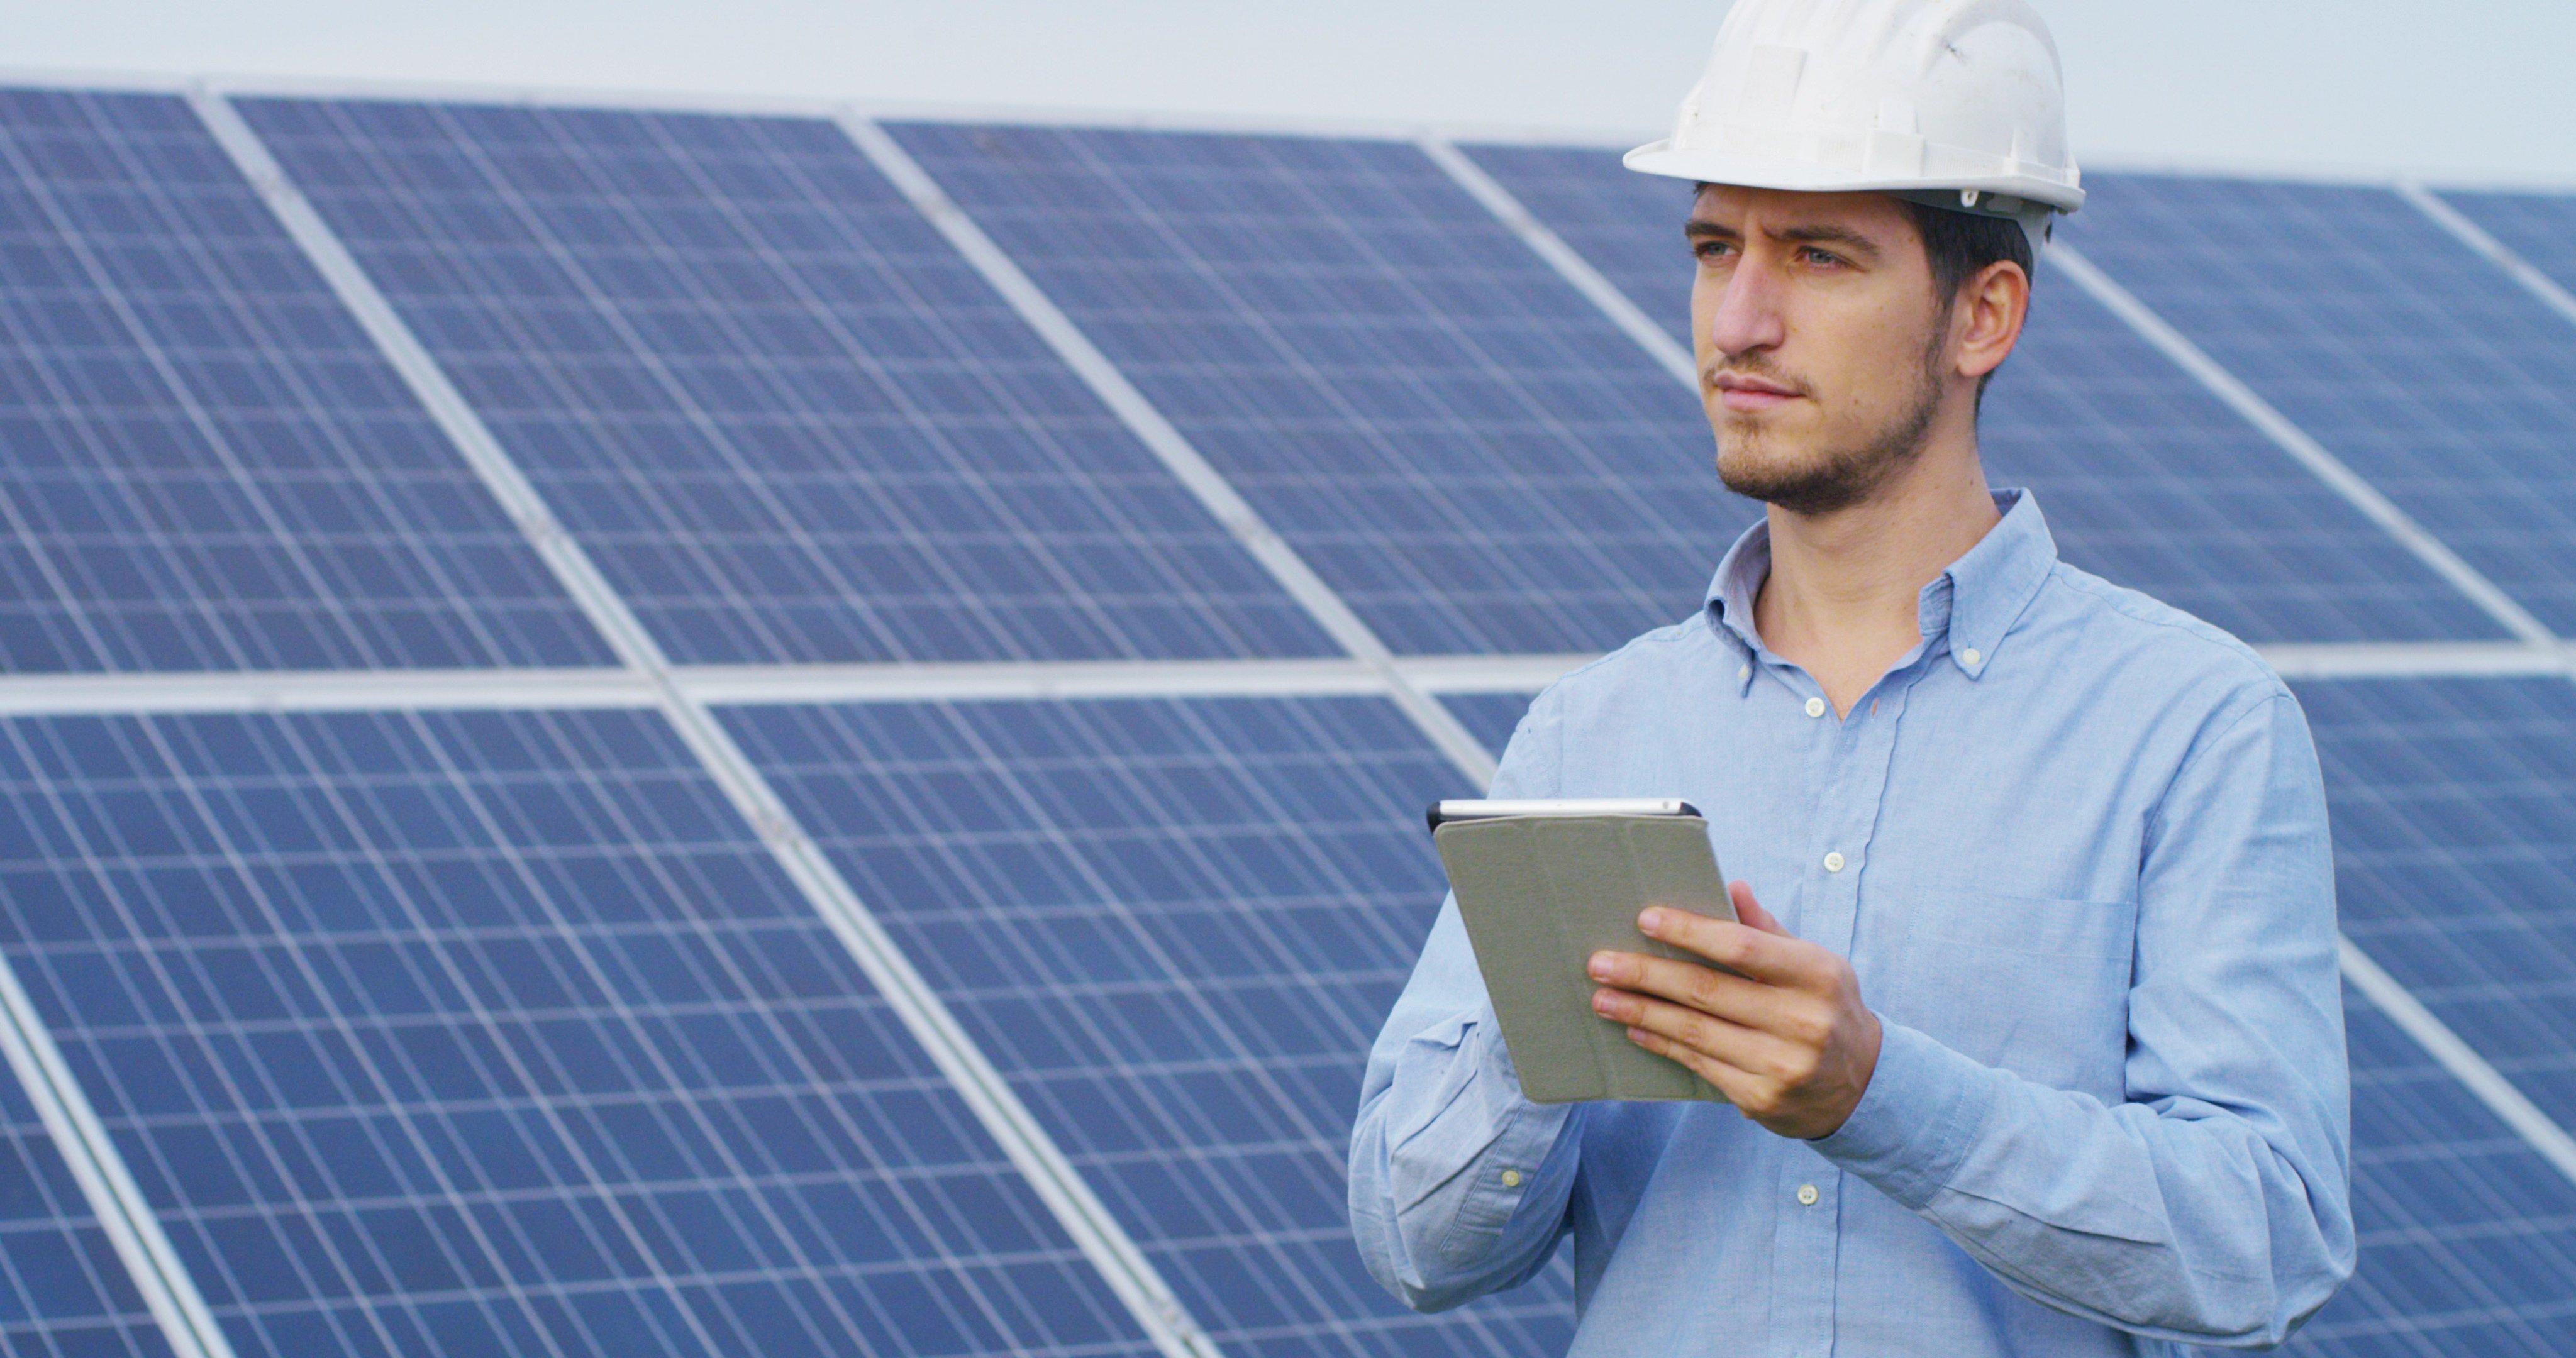 Field Service Engineer with tablet and hard hat beside solar panels